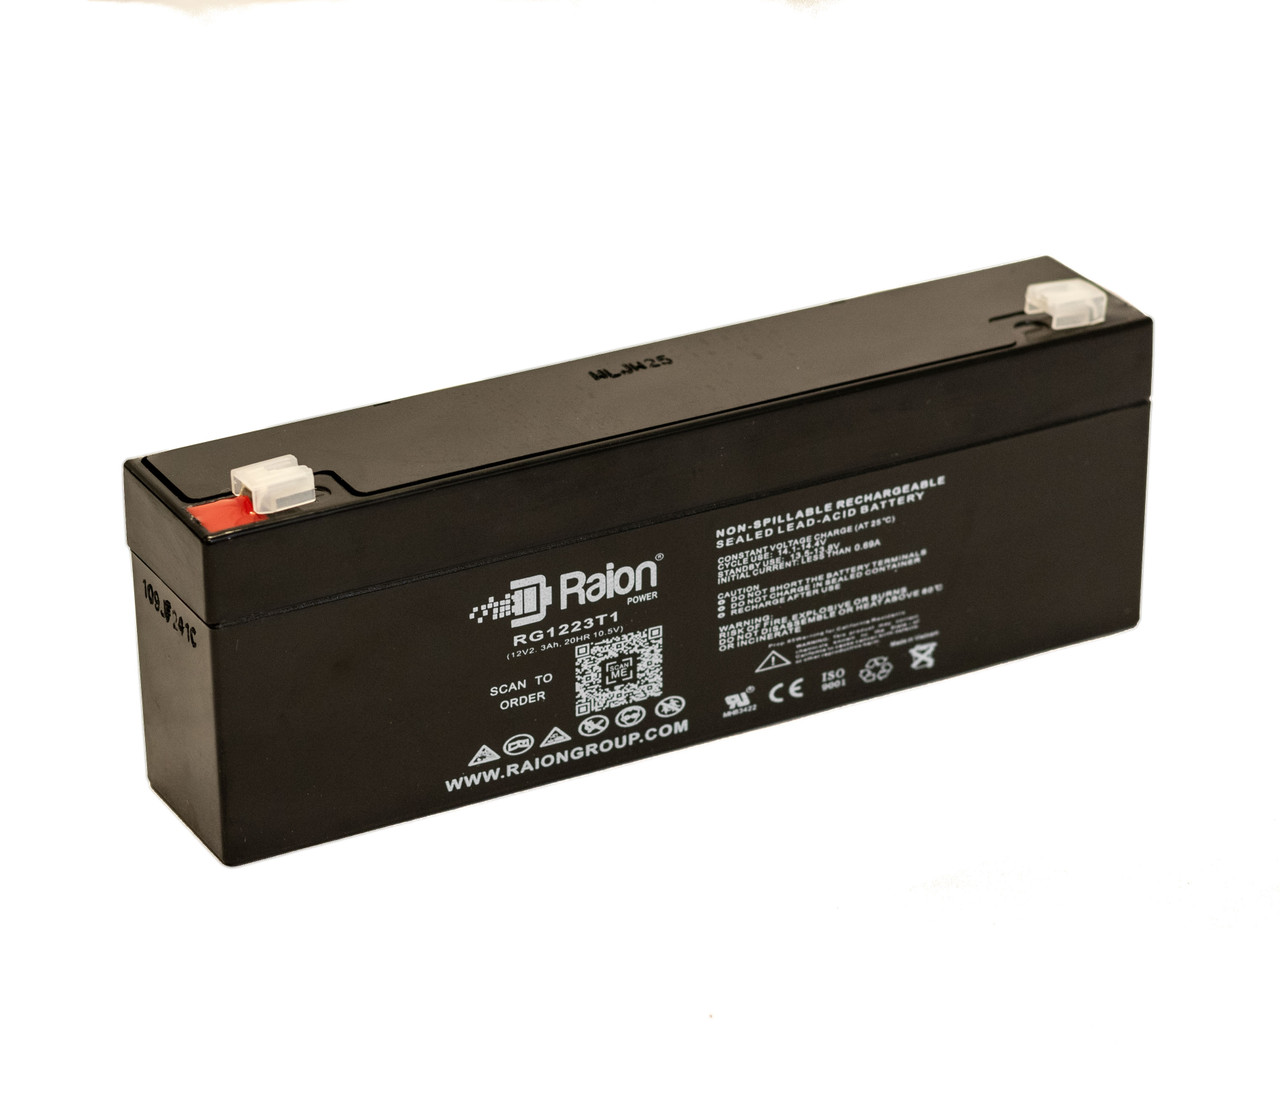 Raion Power RG1223T1 Replacement Battery for Spacelabs Medical PC Display I